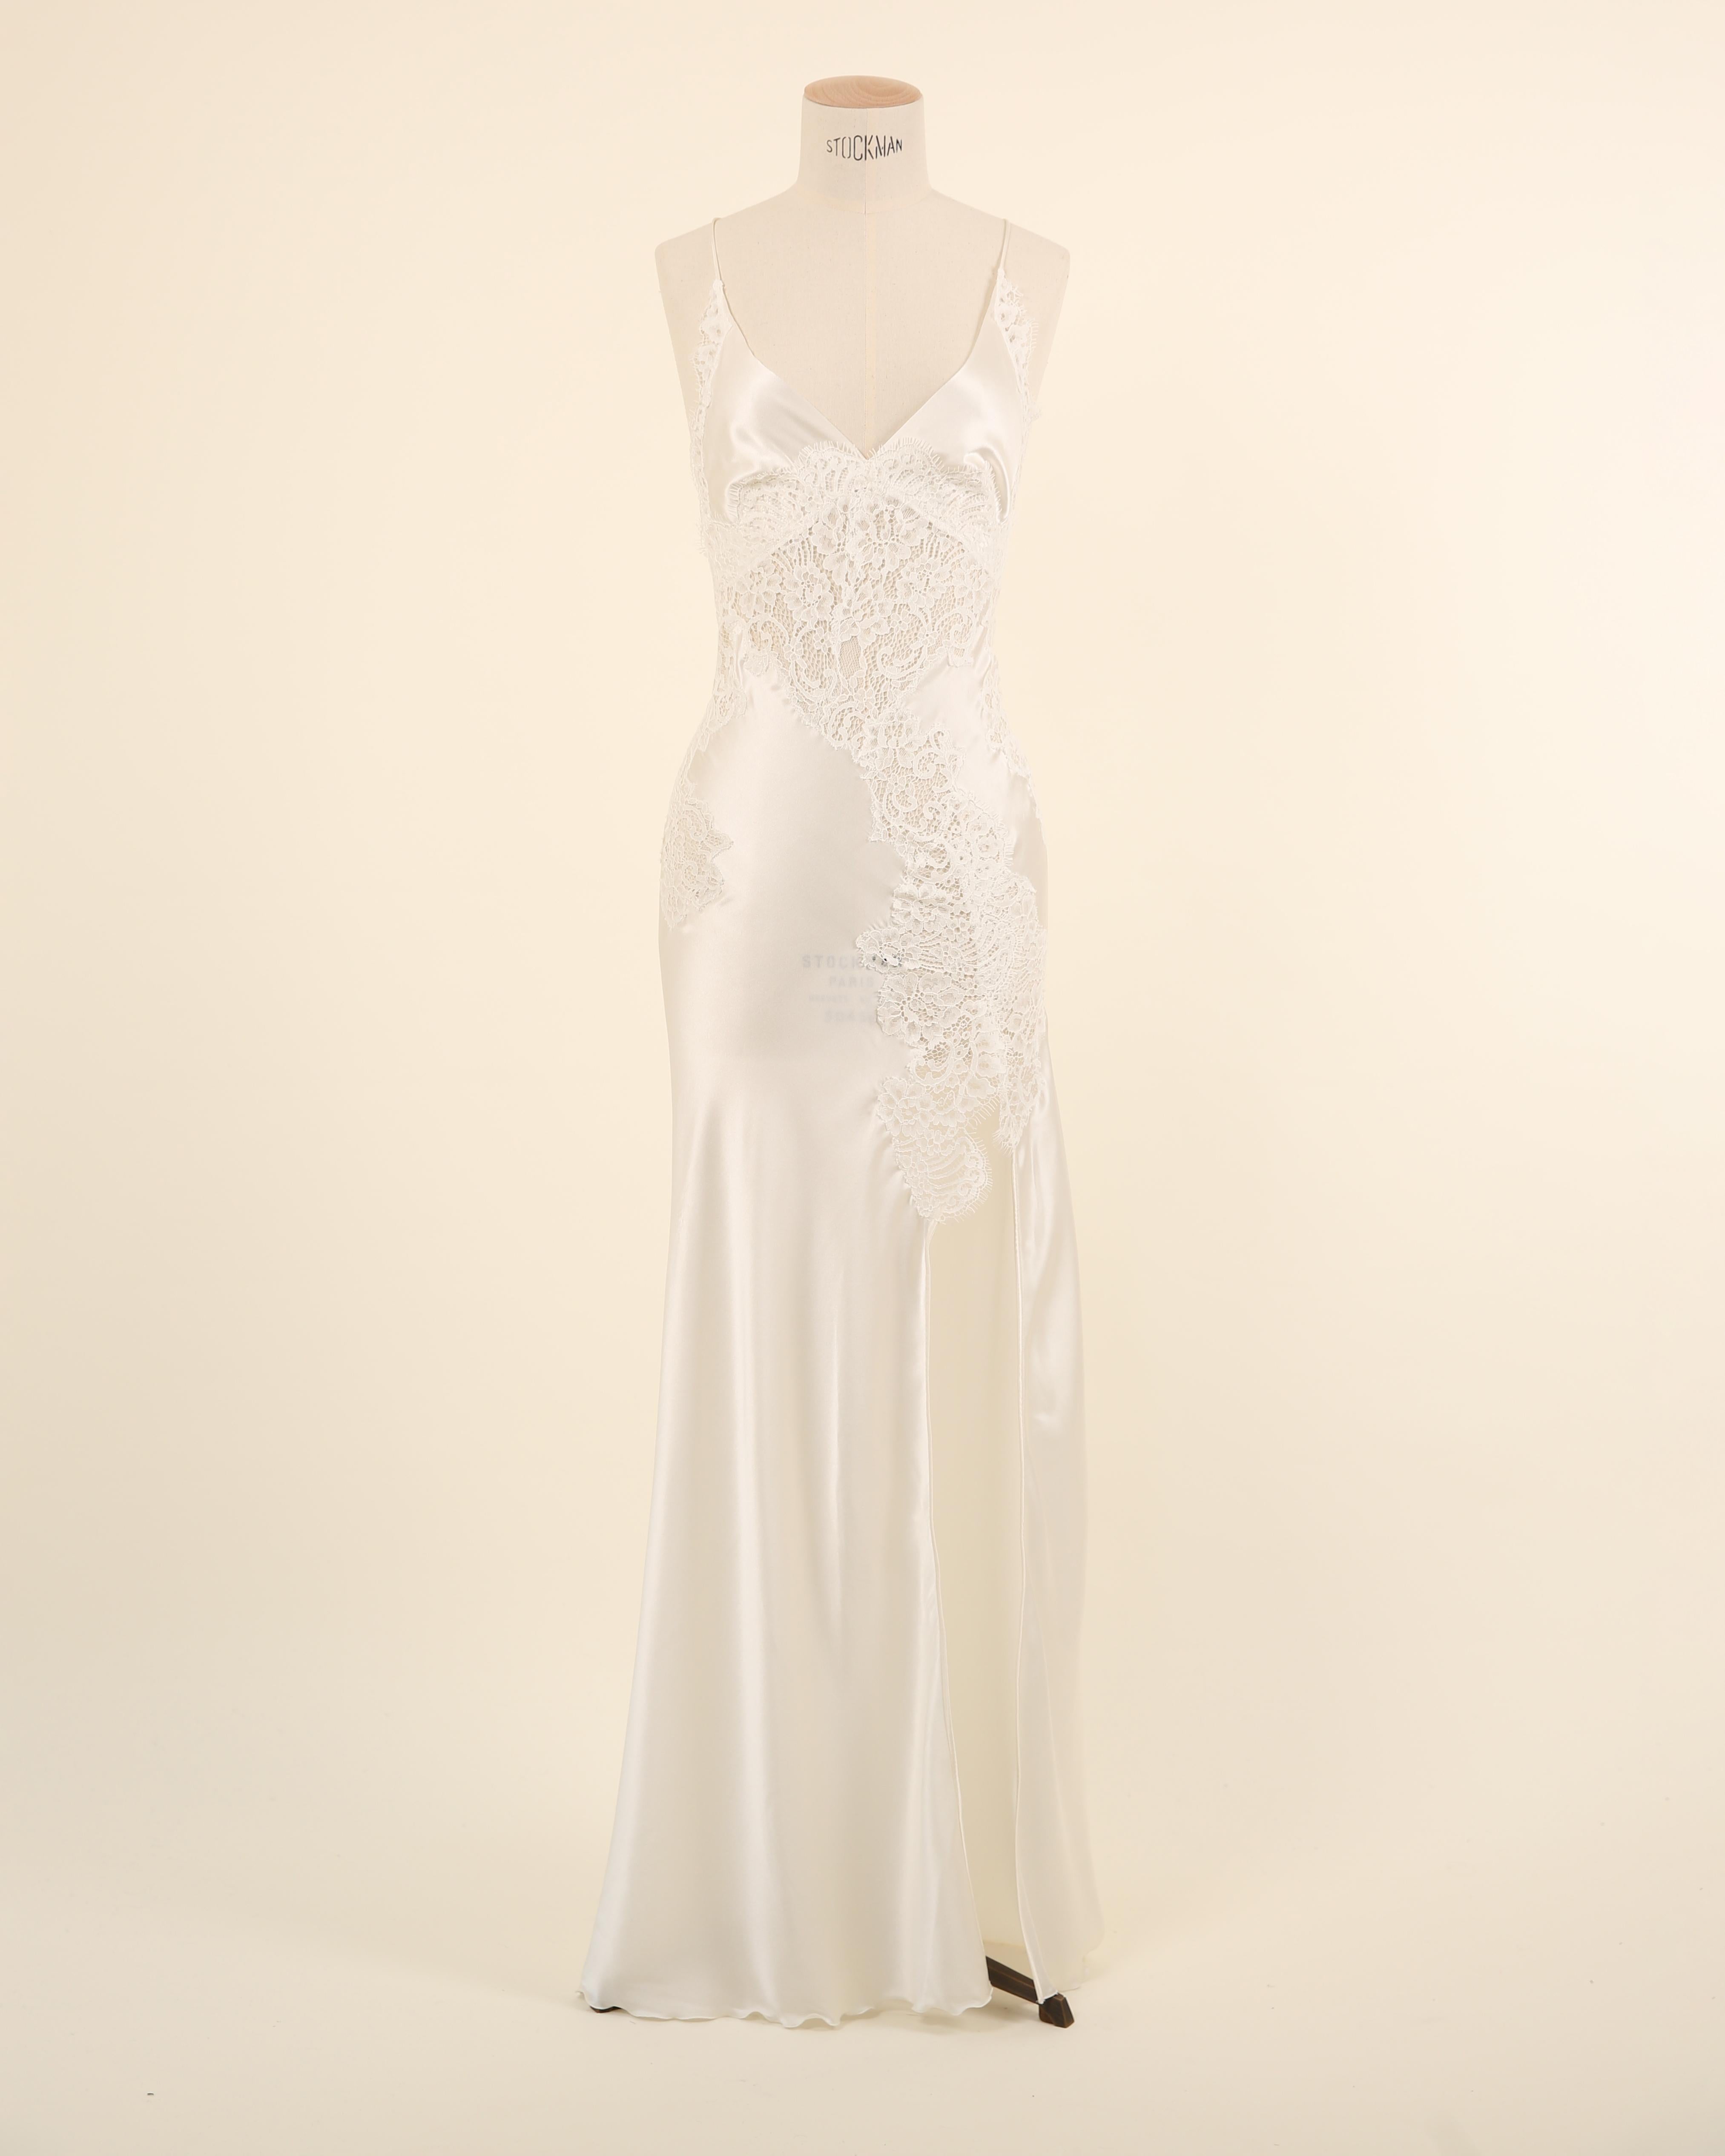 Ermanno Scervino Lingerie silk and lace night gown
I would say the gown is ivory, but it is very nearly white. It would make a beautiful night gown for a bride getting ready for her wedding
Silk with lace inserts
Low neckline and completely backless